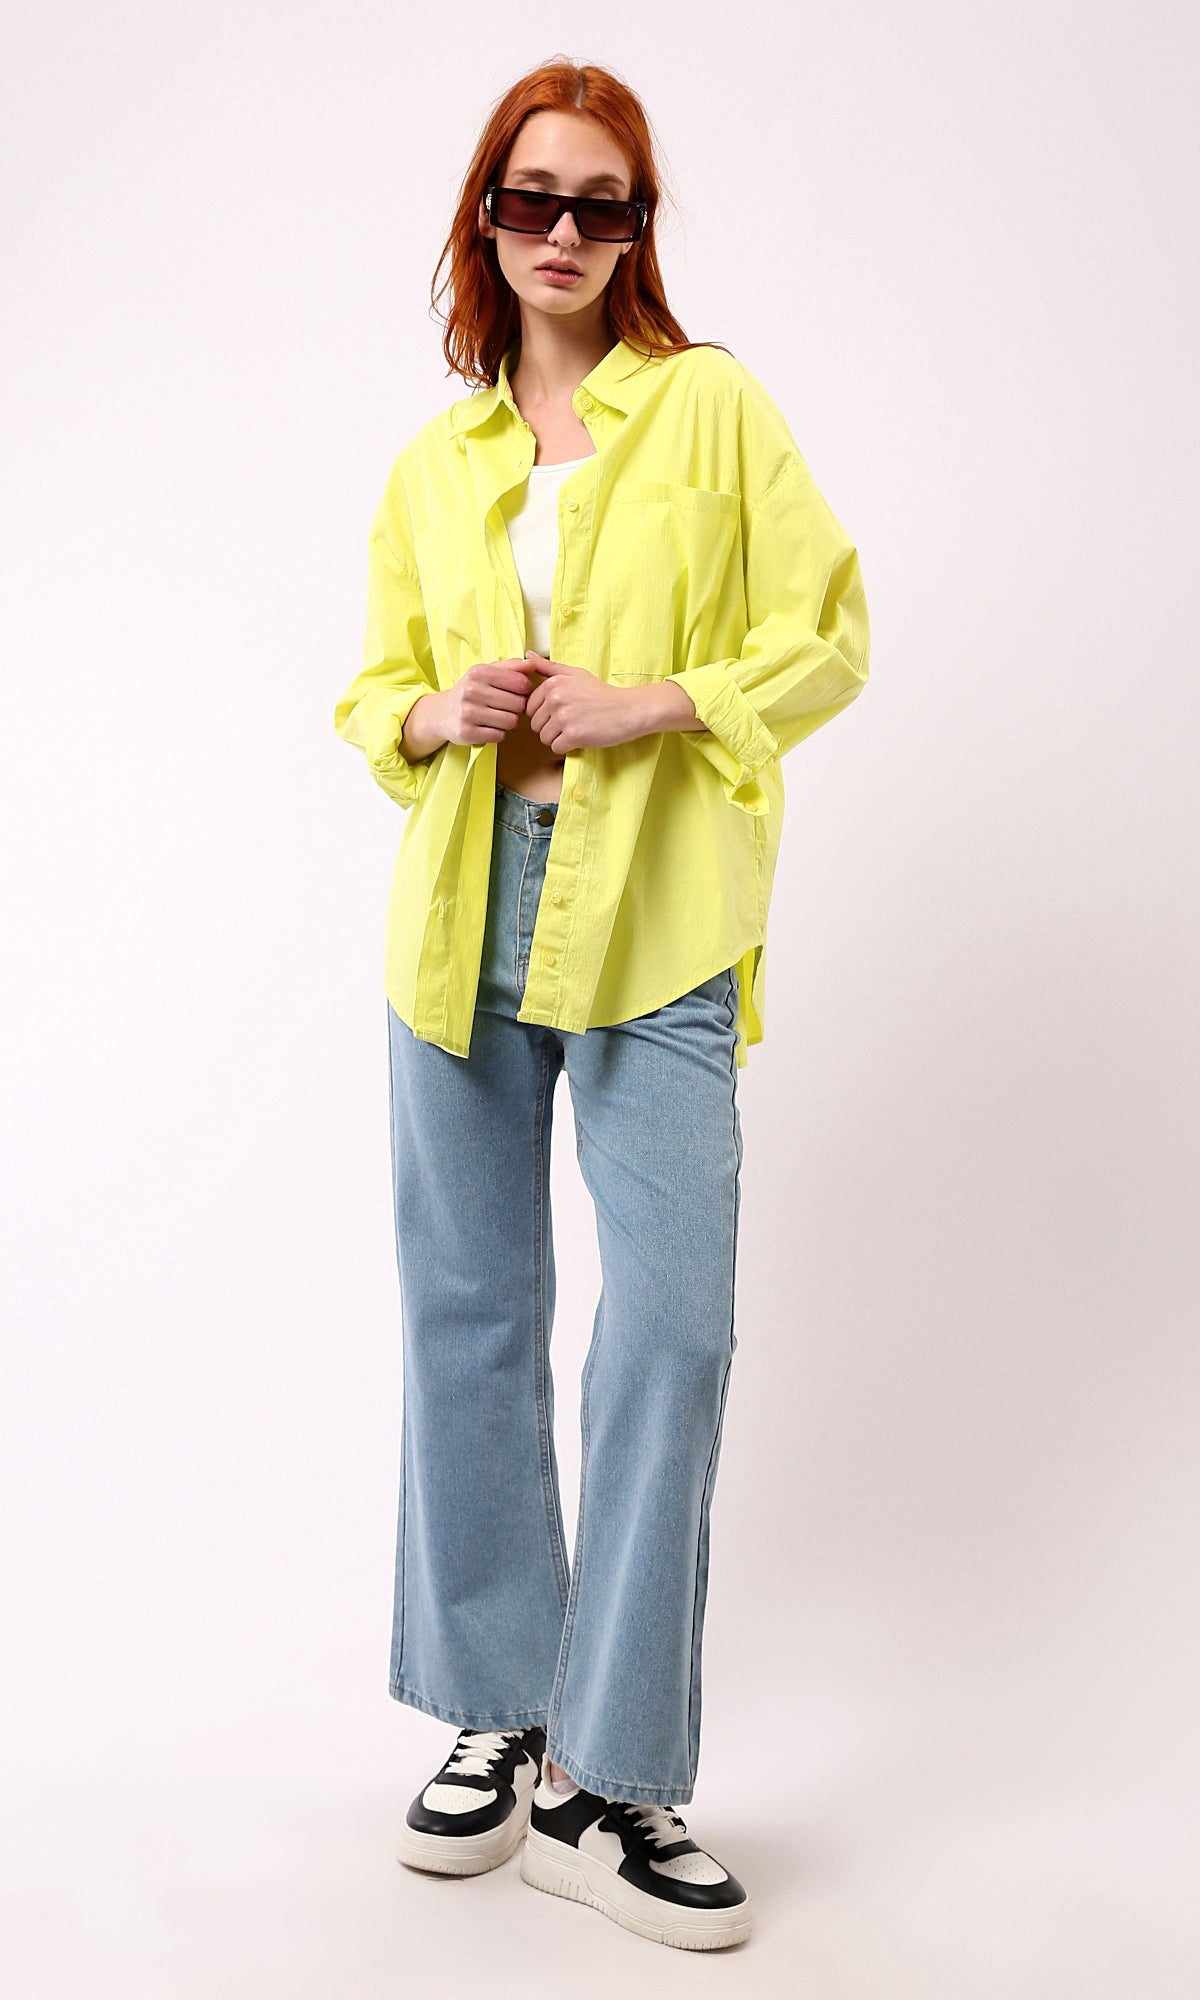 O177908 Full Buttons Down Neon Yellow Loose Shirt